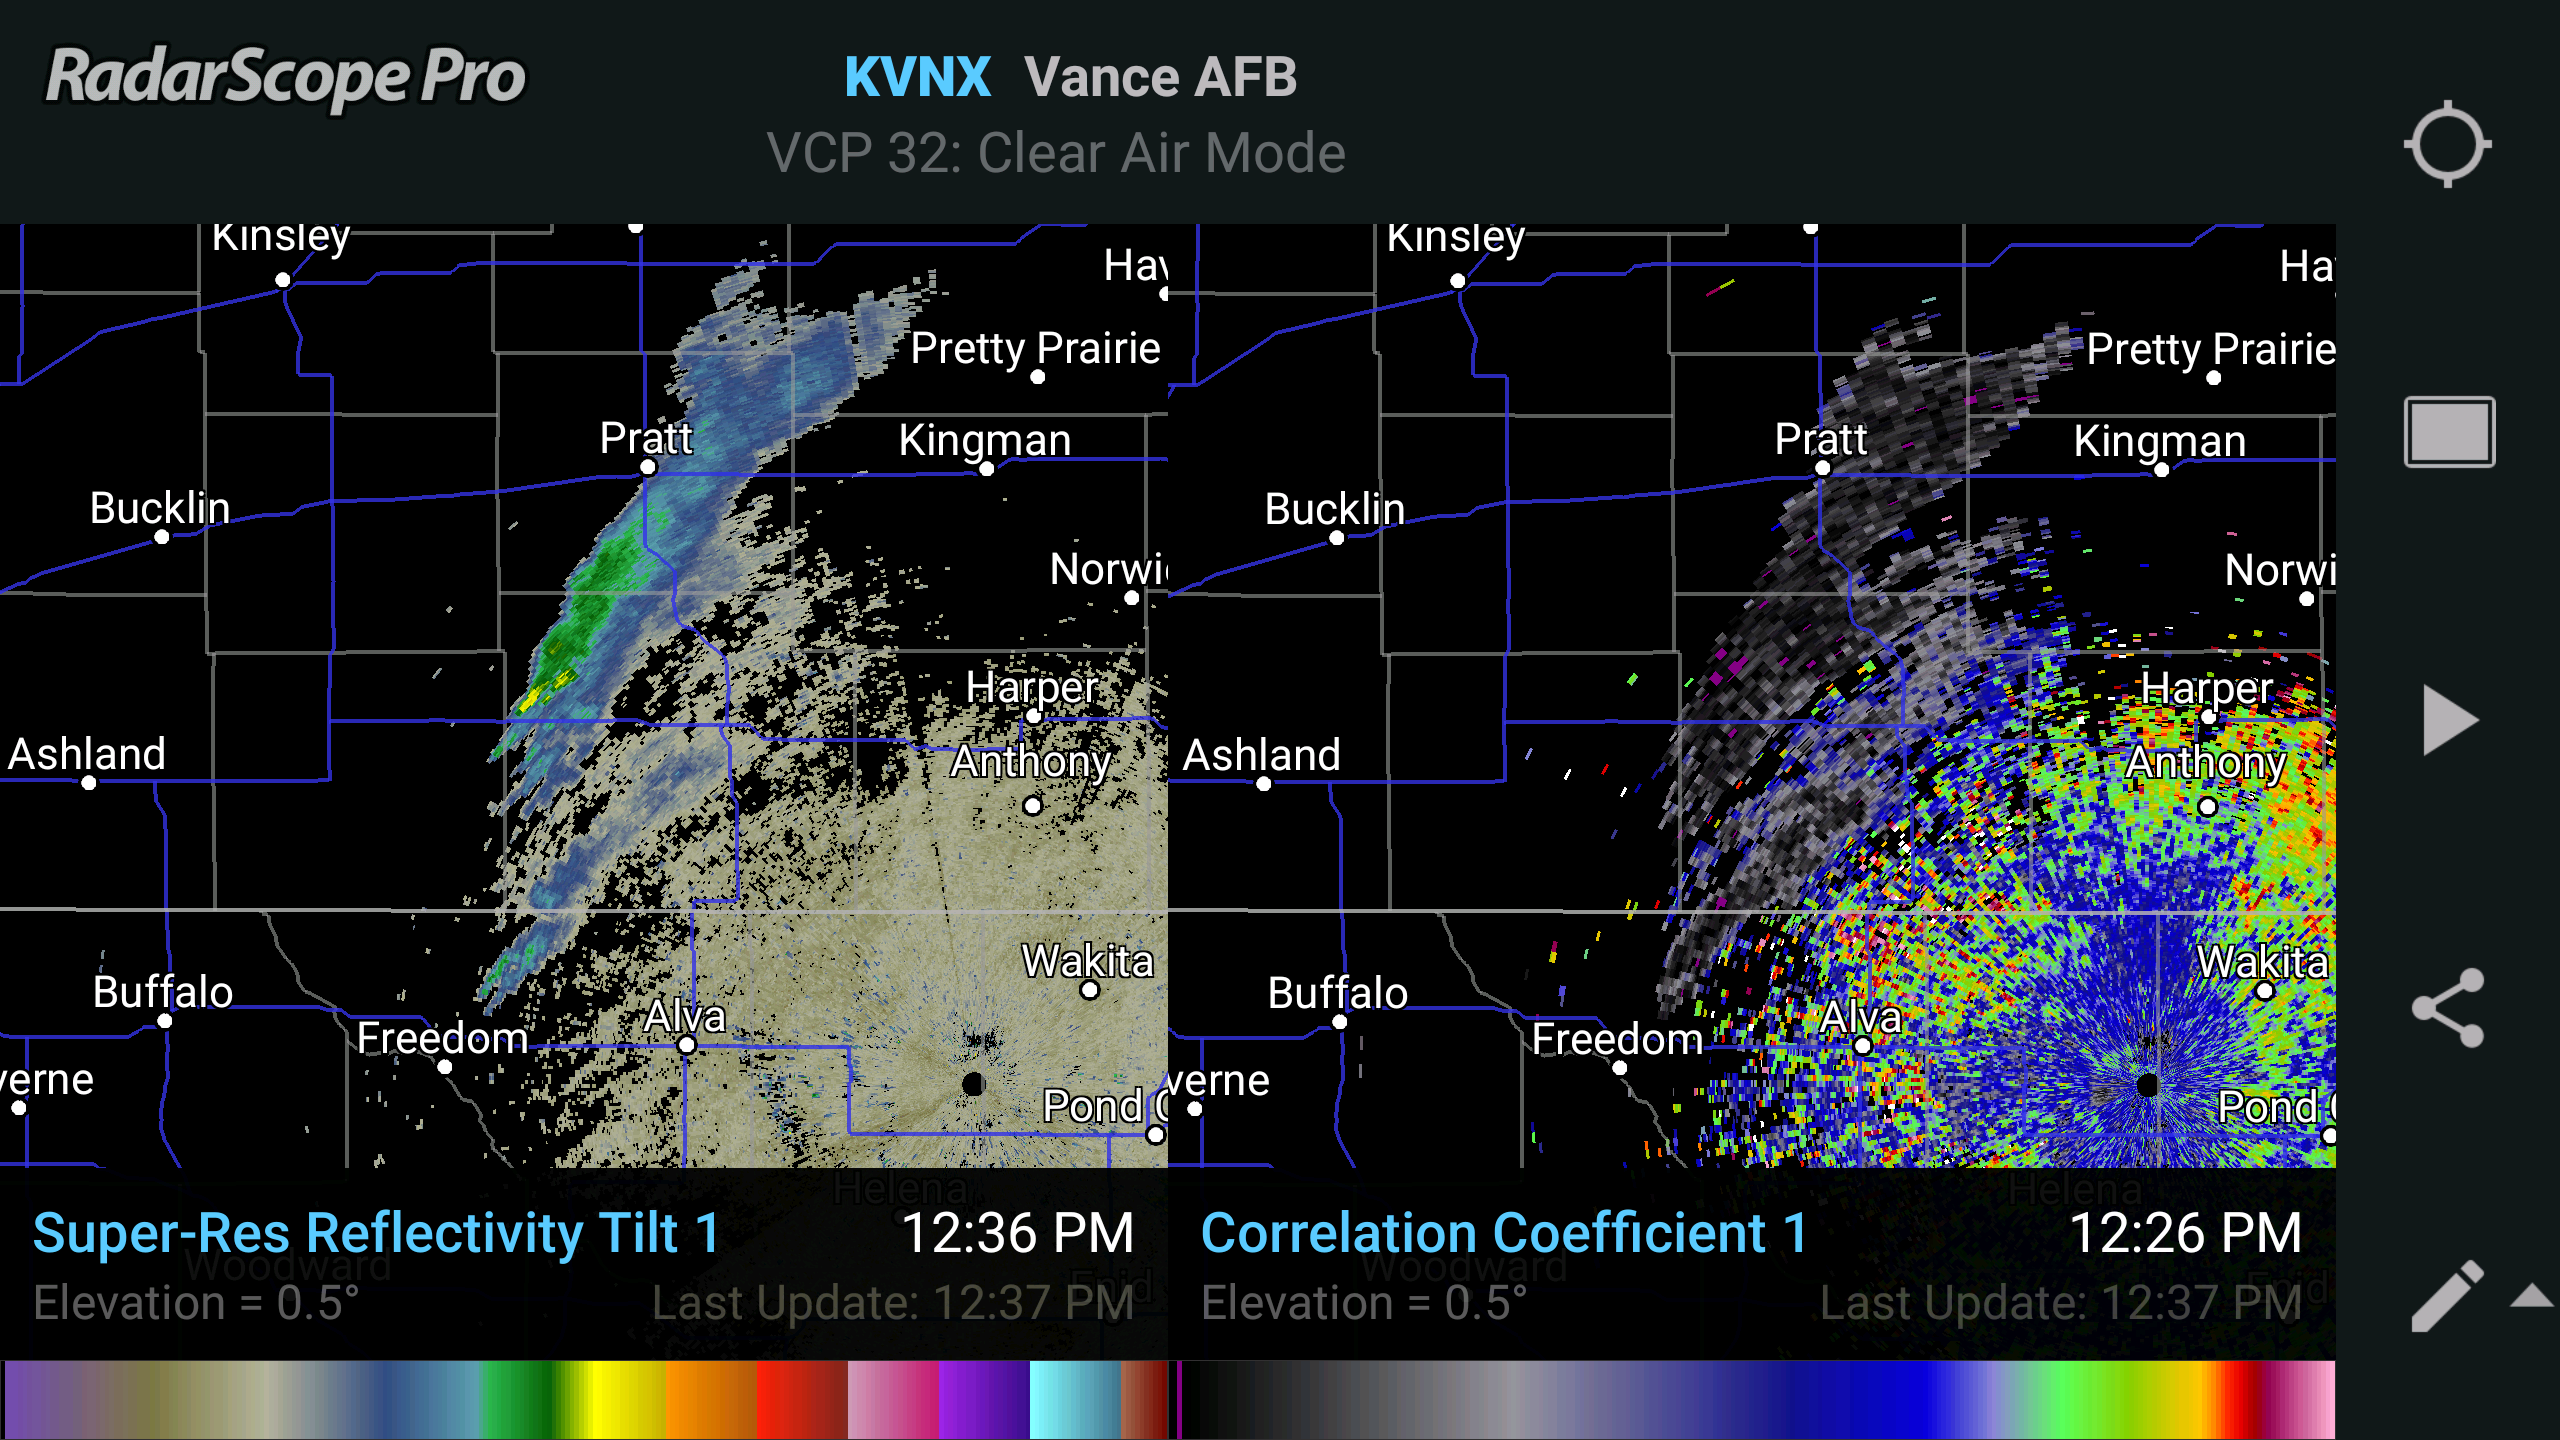 Smoke Plume in Reflectivity and Correlation Coefficient